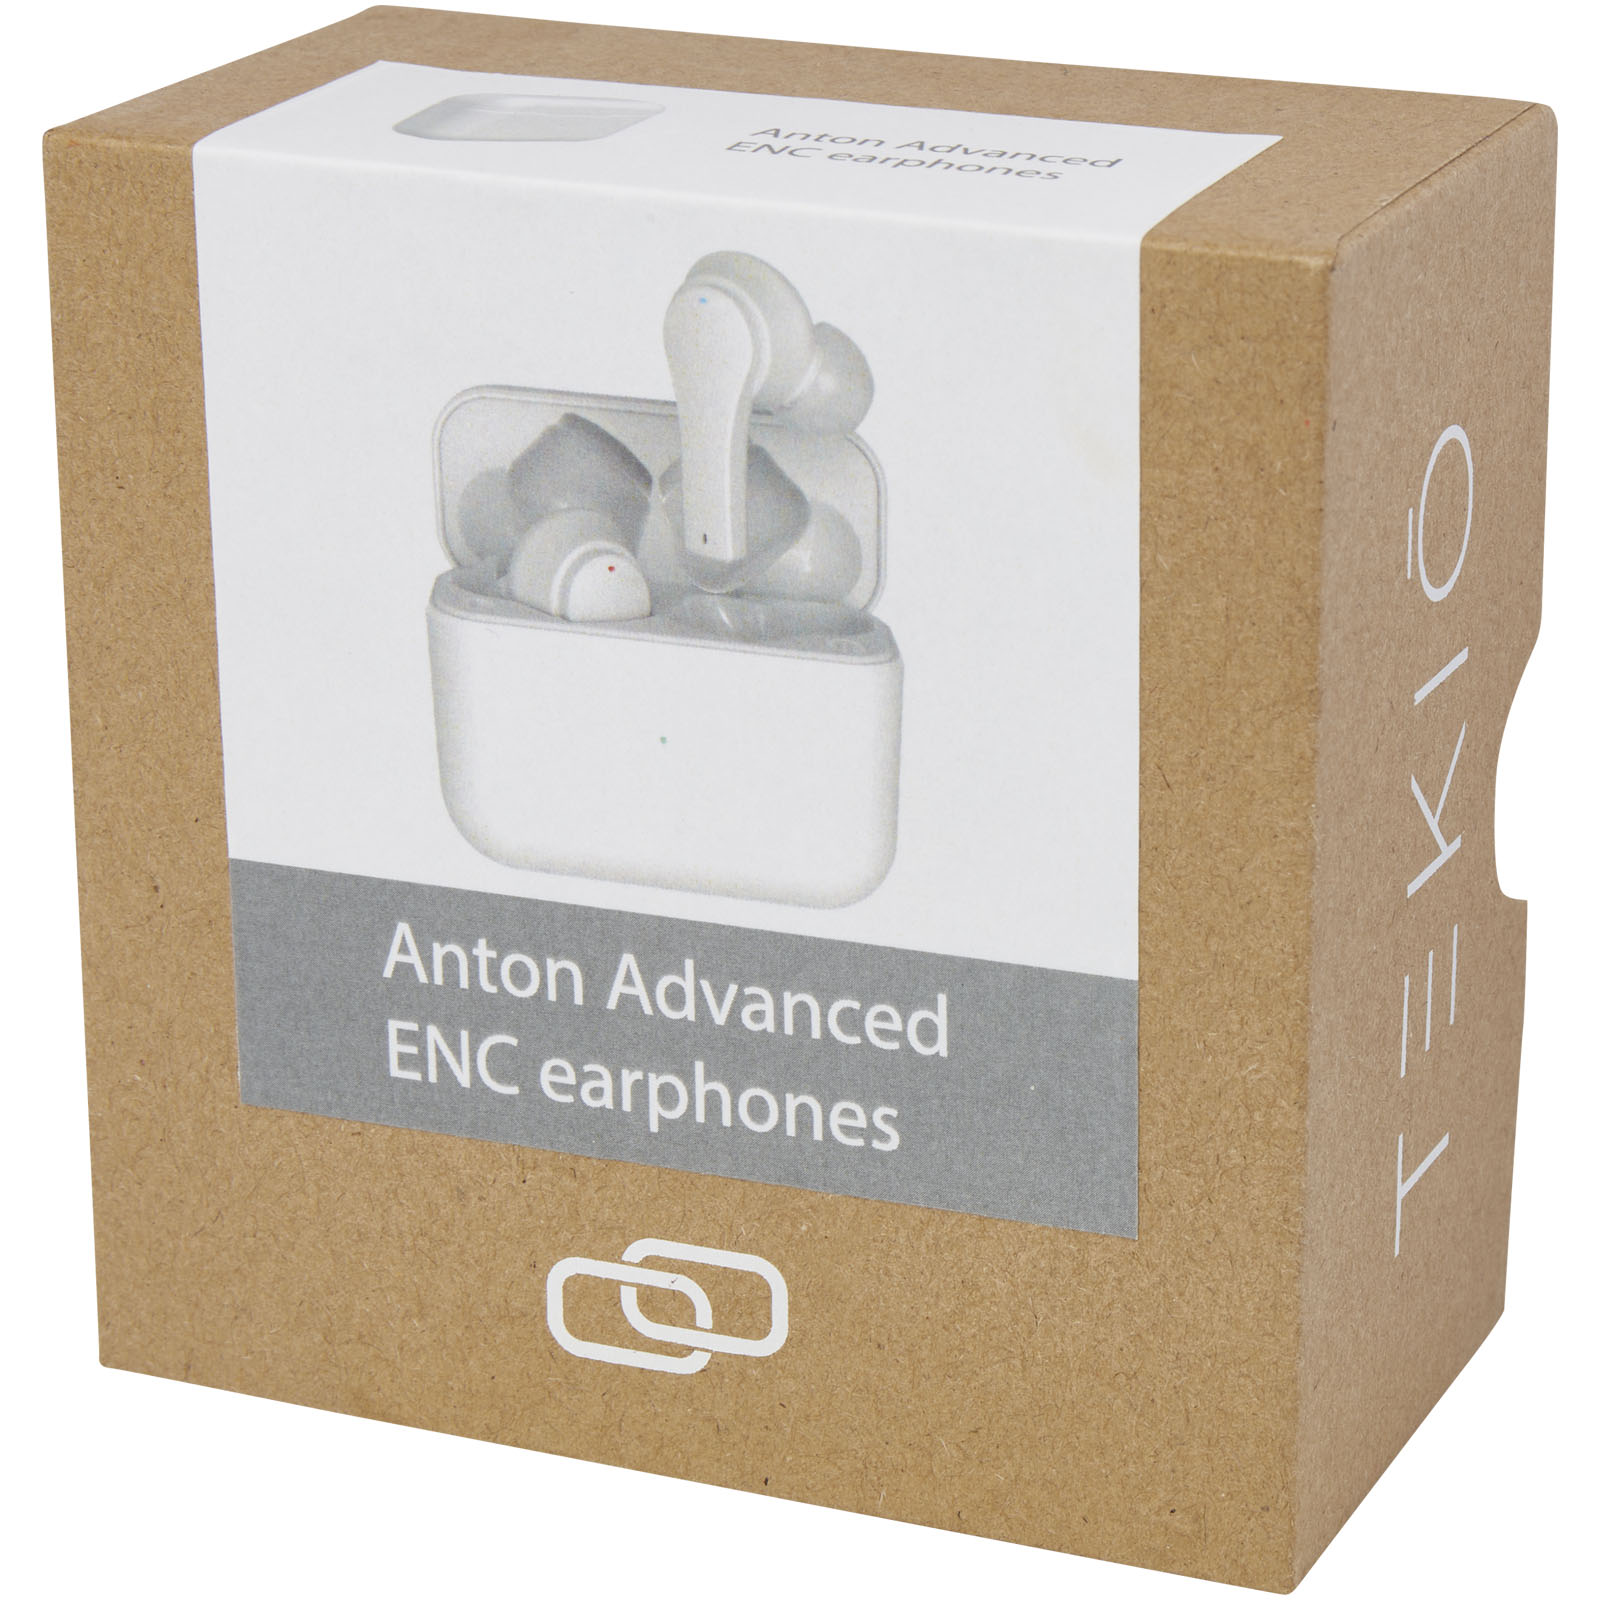 Advertising Earbuds - Anton Advanced ENC earbuds - 1